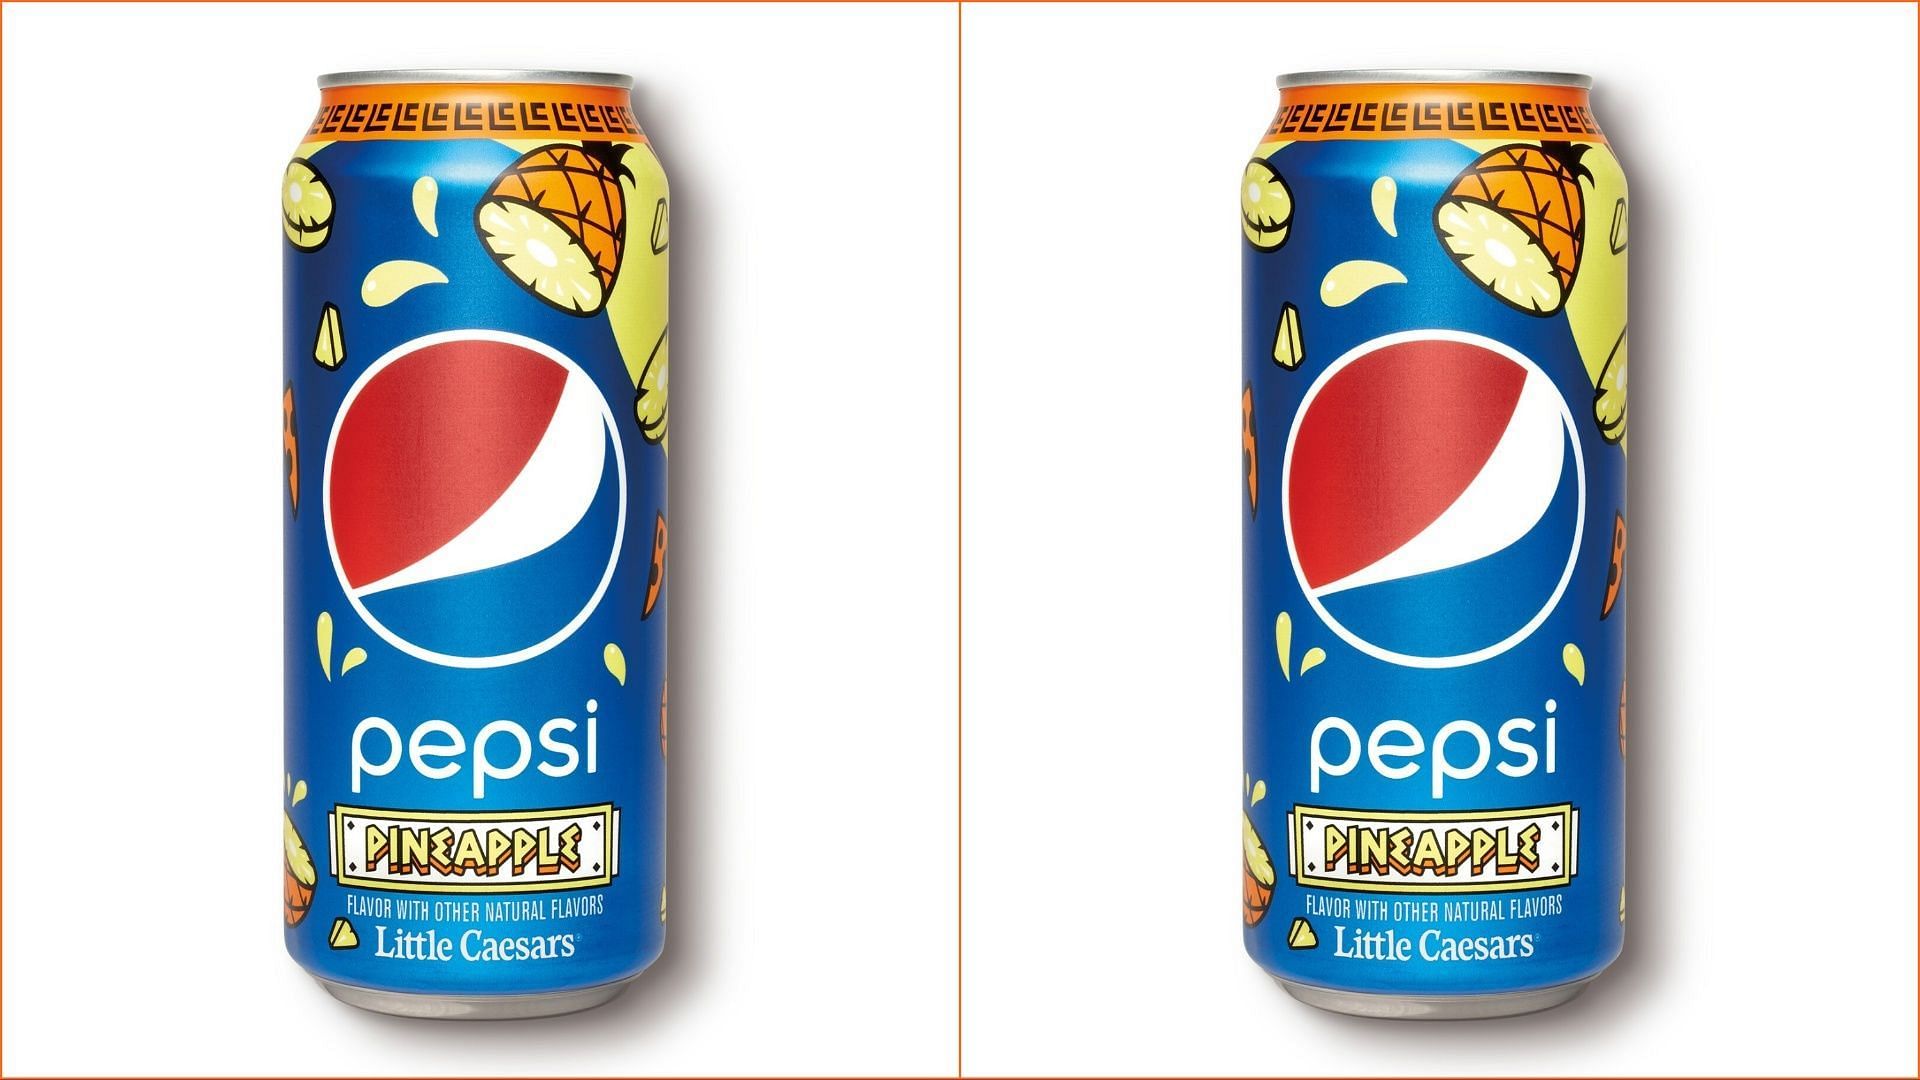 The pineapple-flavored Pepsi is exclusively available at Little Caesars starting July 17 (Image via Pepsi / Little Caesars)